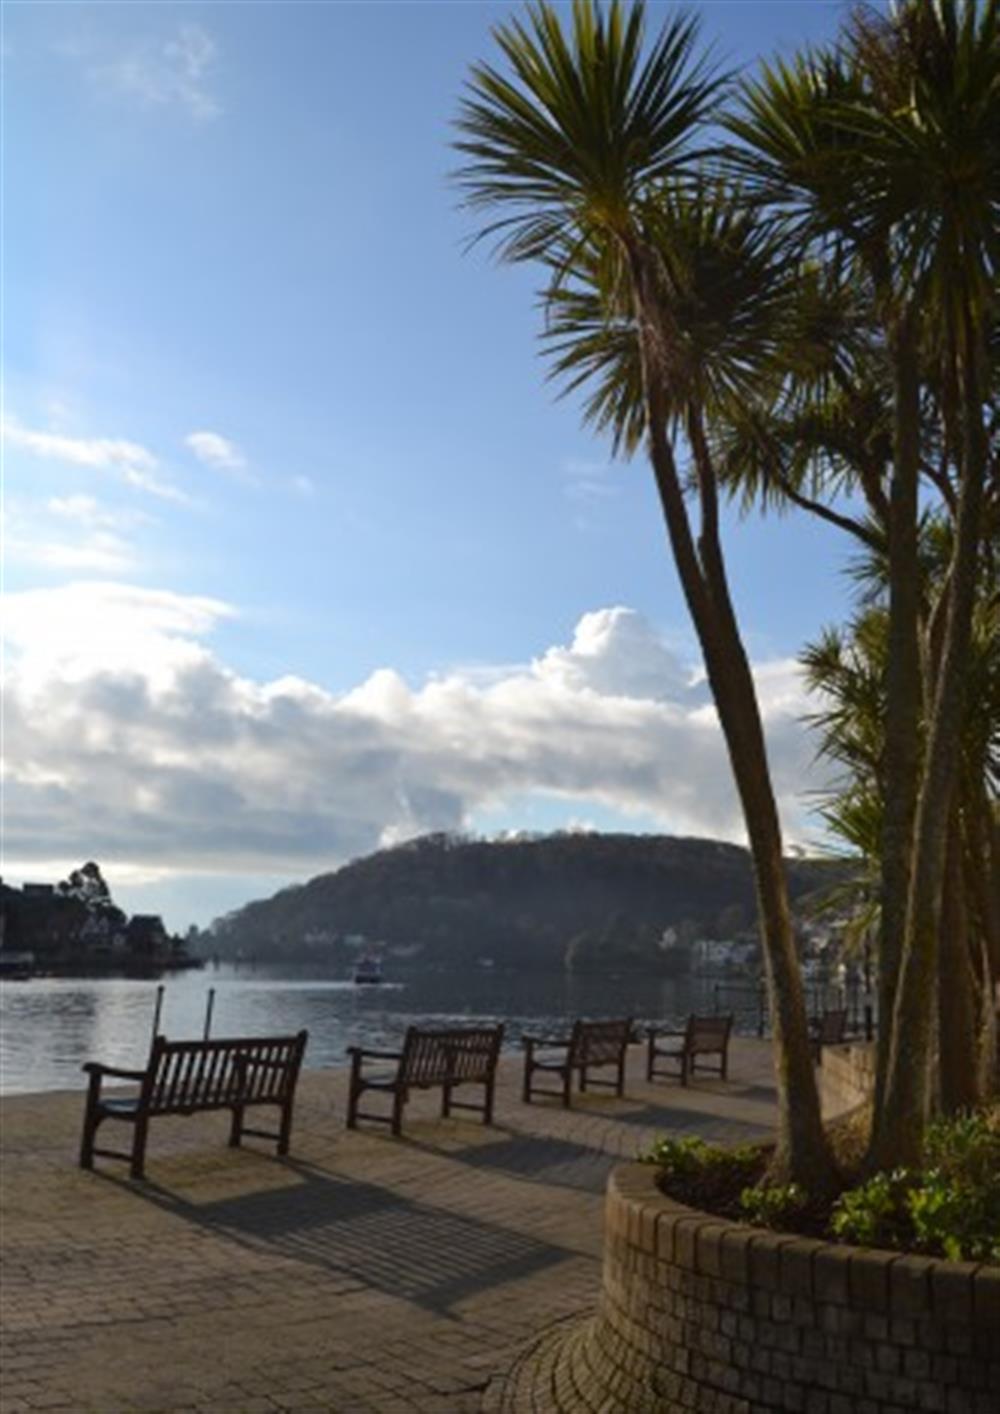 Riverside seating on the embankment. at The Holt in Dartmouth